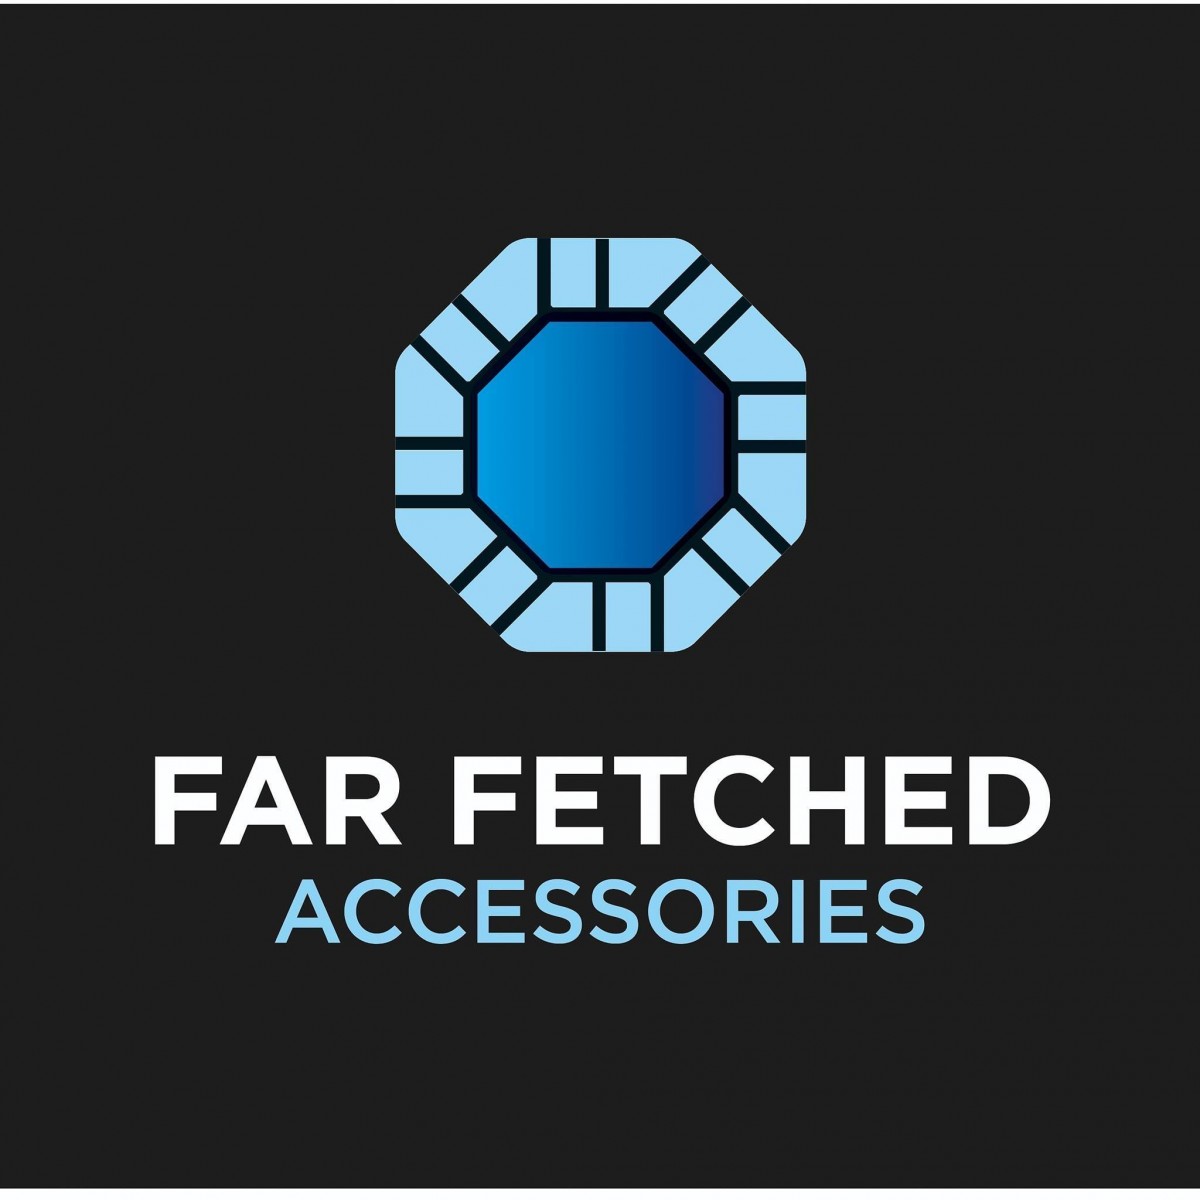 Far Fetched Accessories